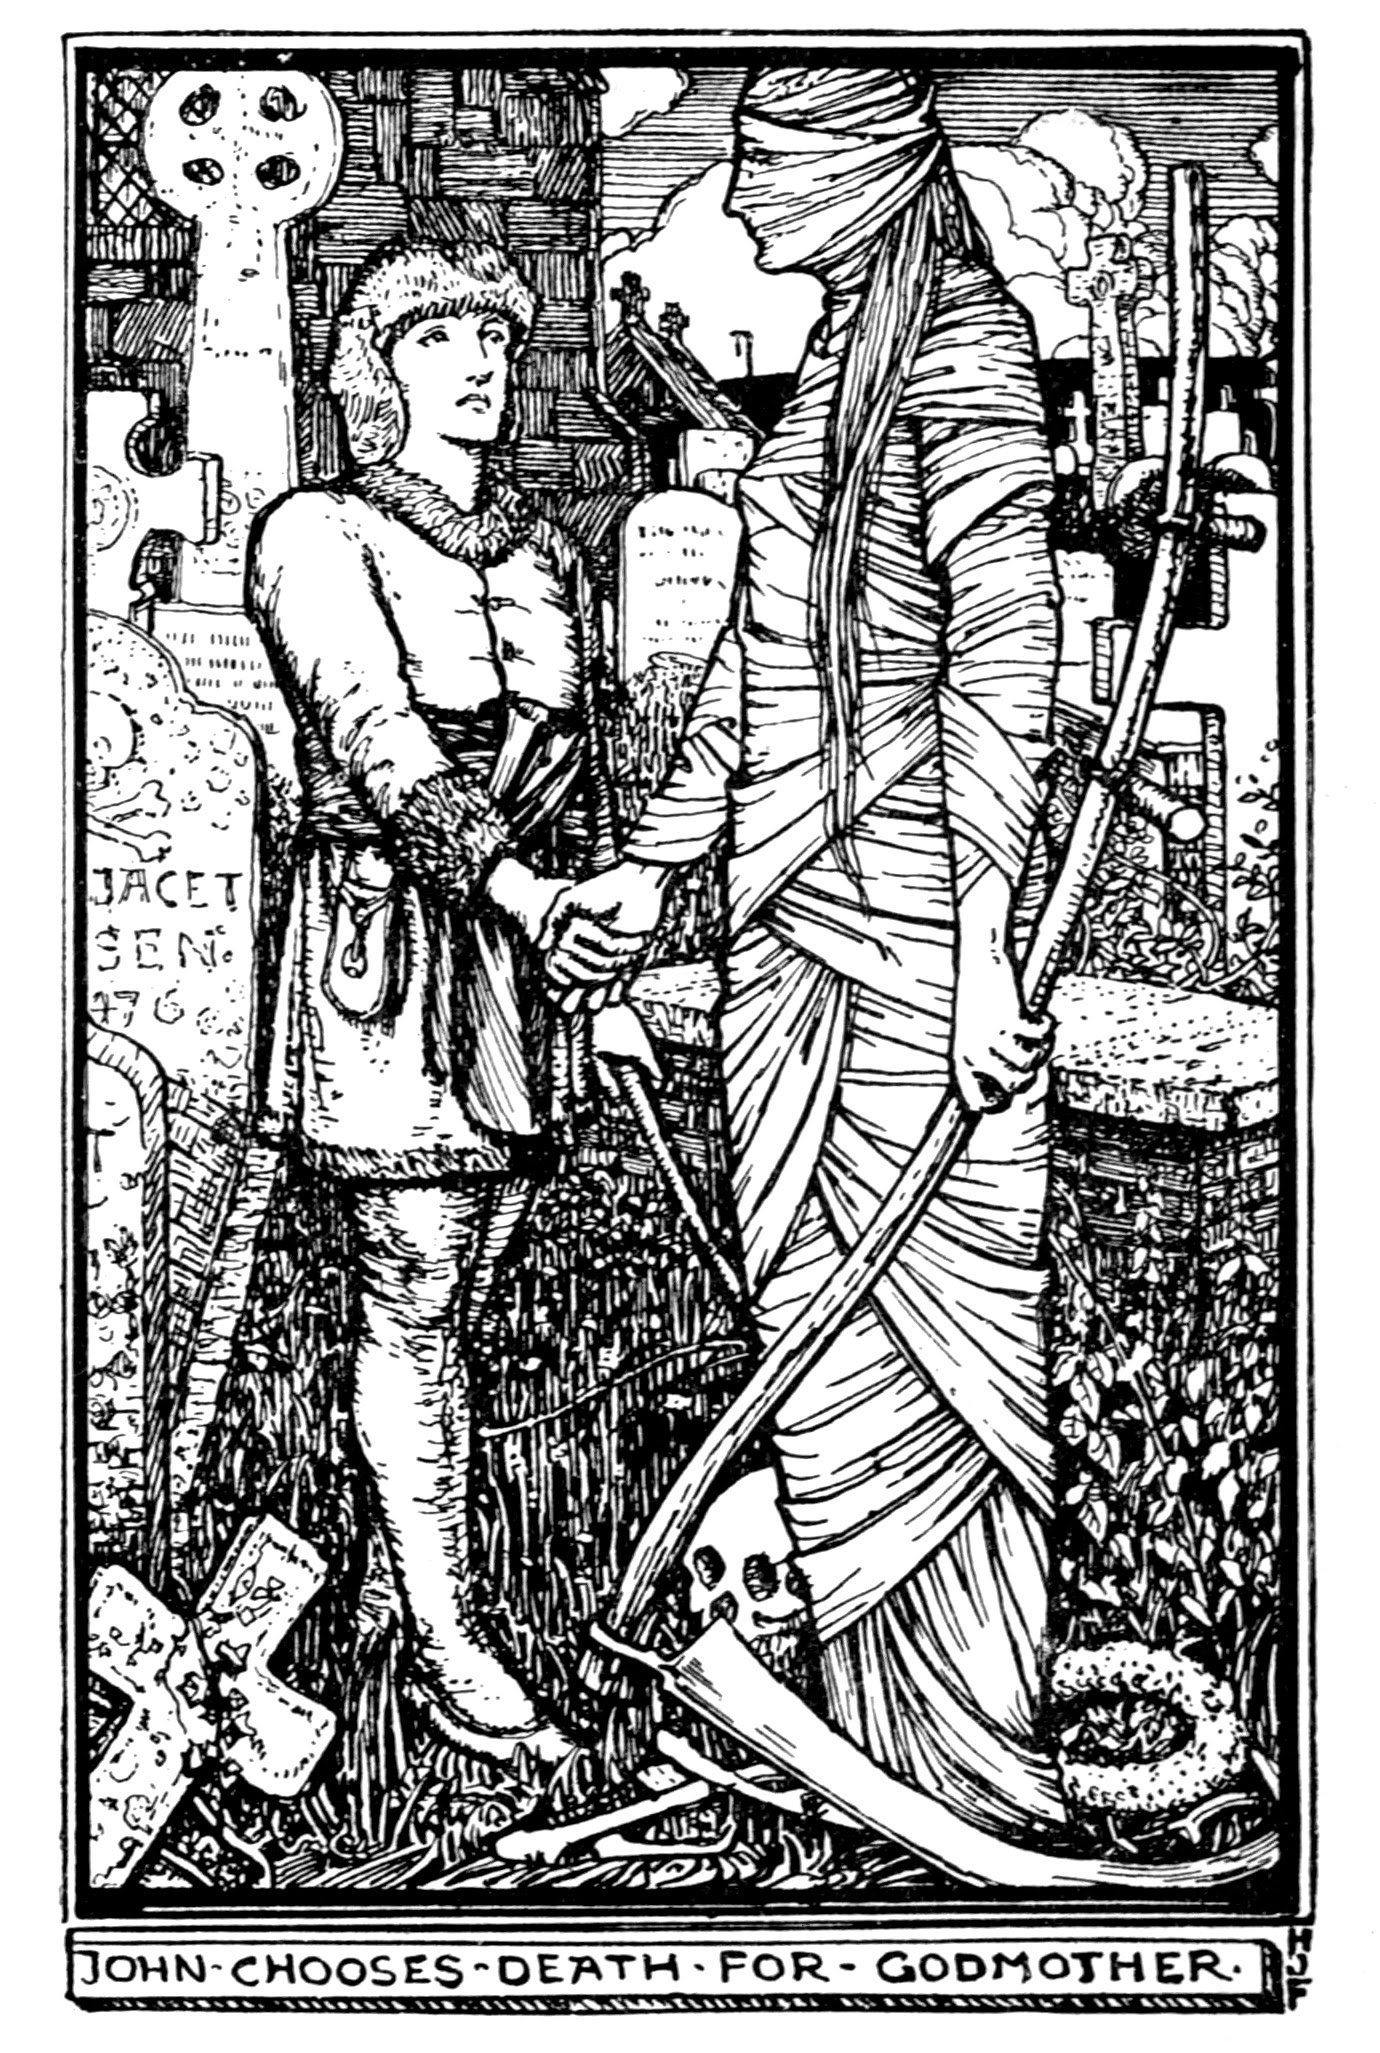 Henry Justice Ford - The all sorts of stories book by Mrs. Lang ; edited by Andrew Lang, 1911 (2)